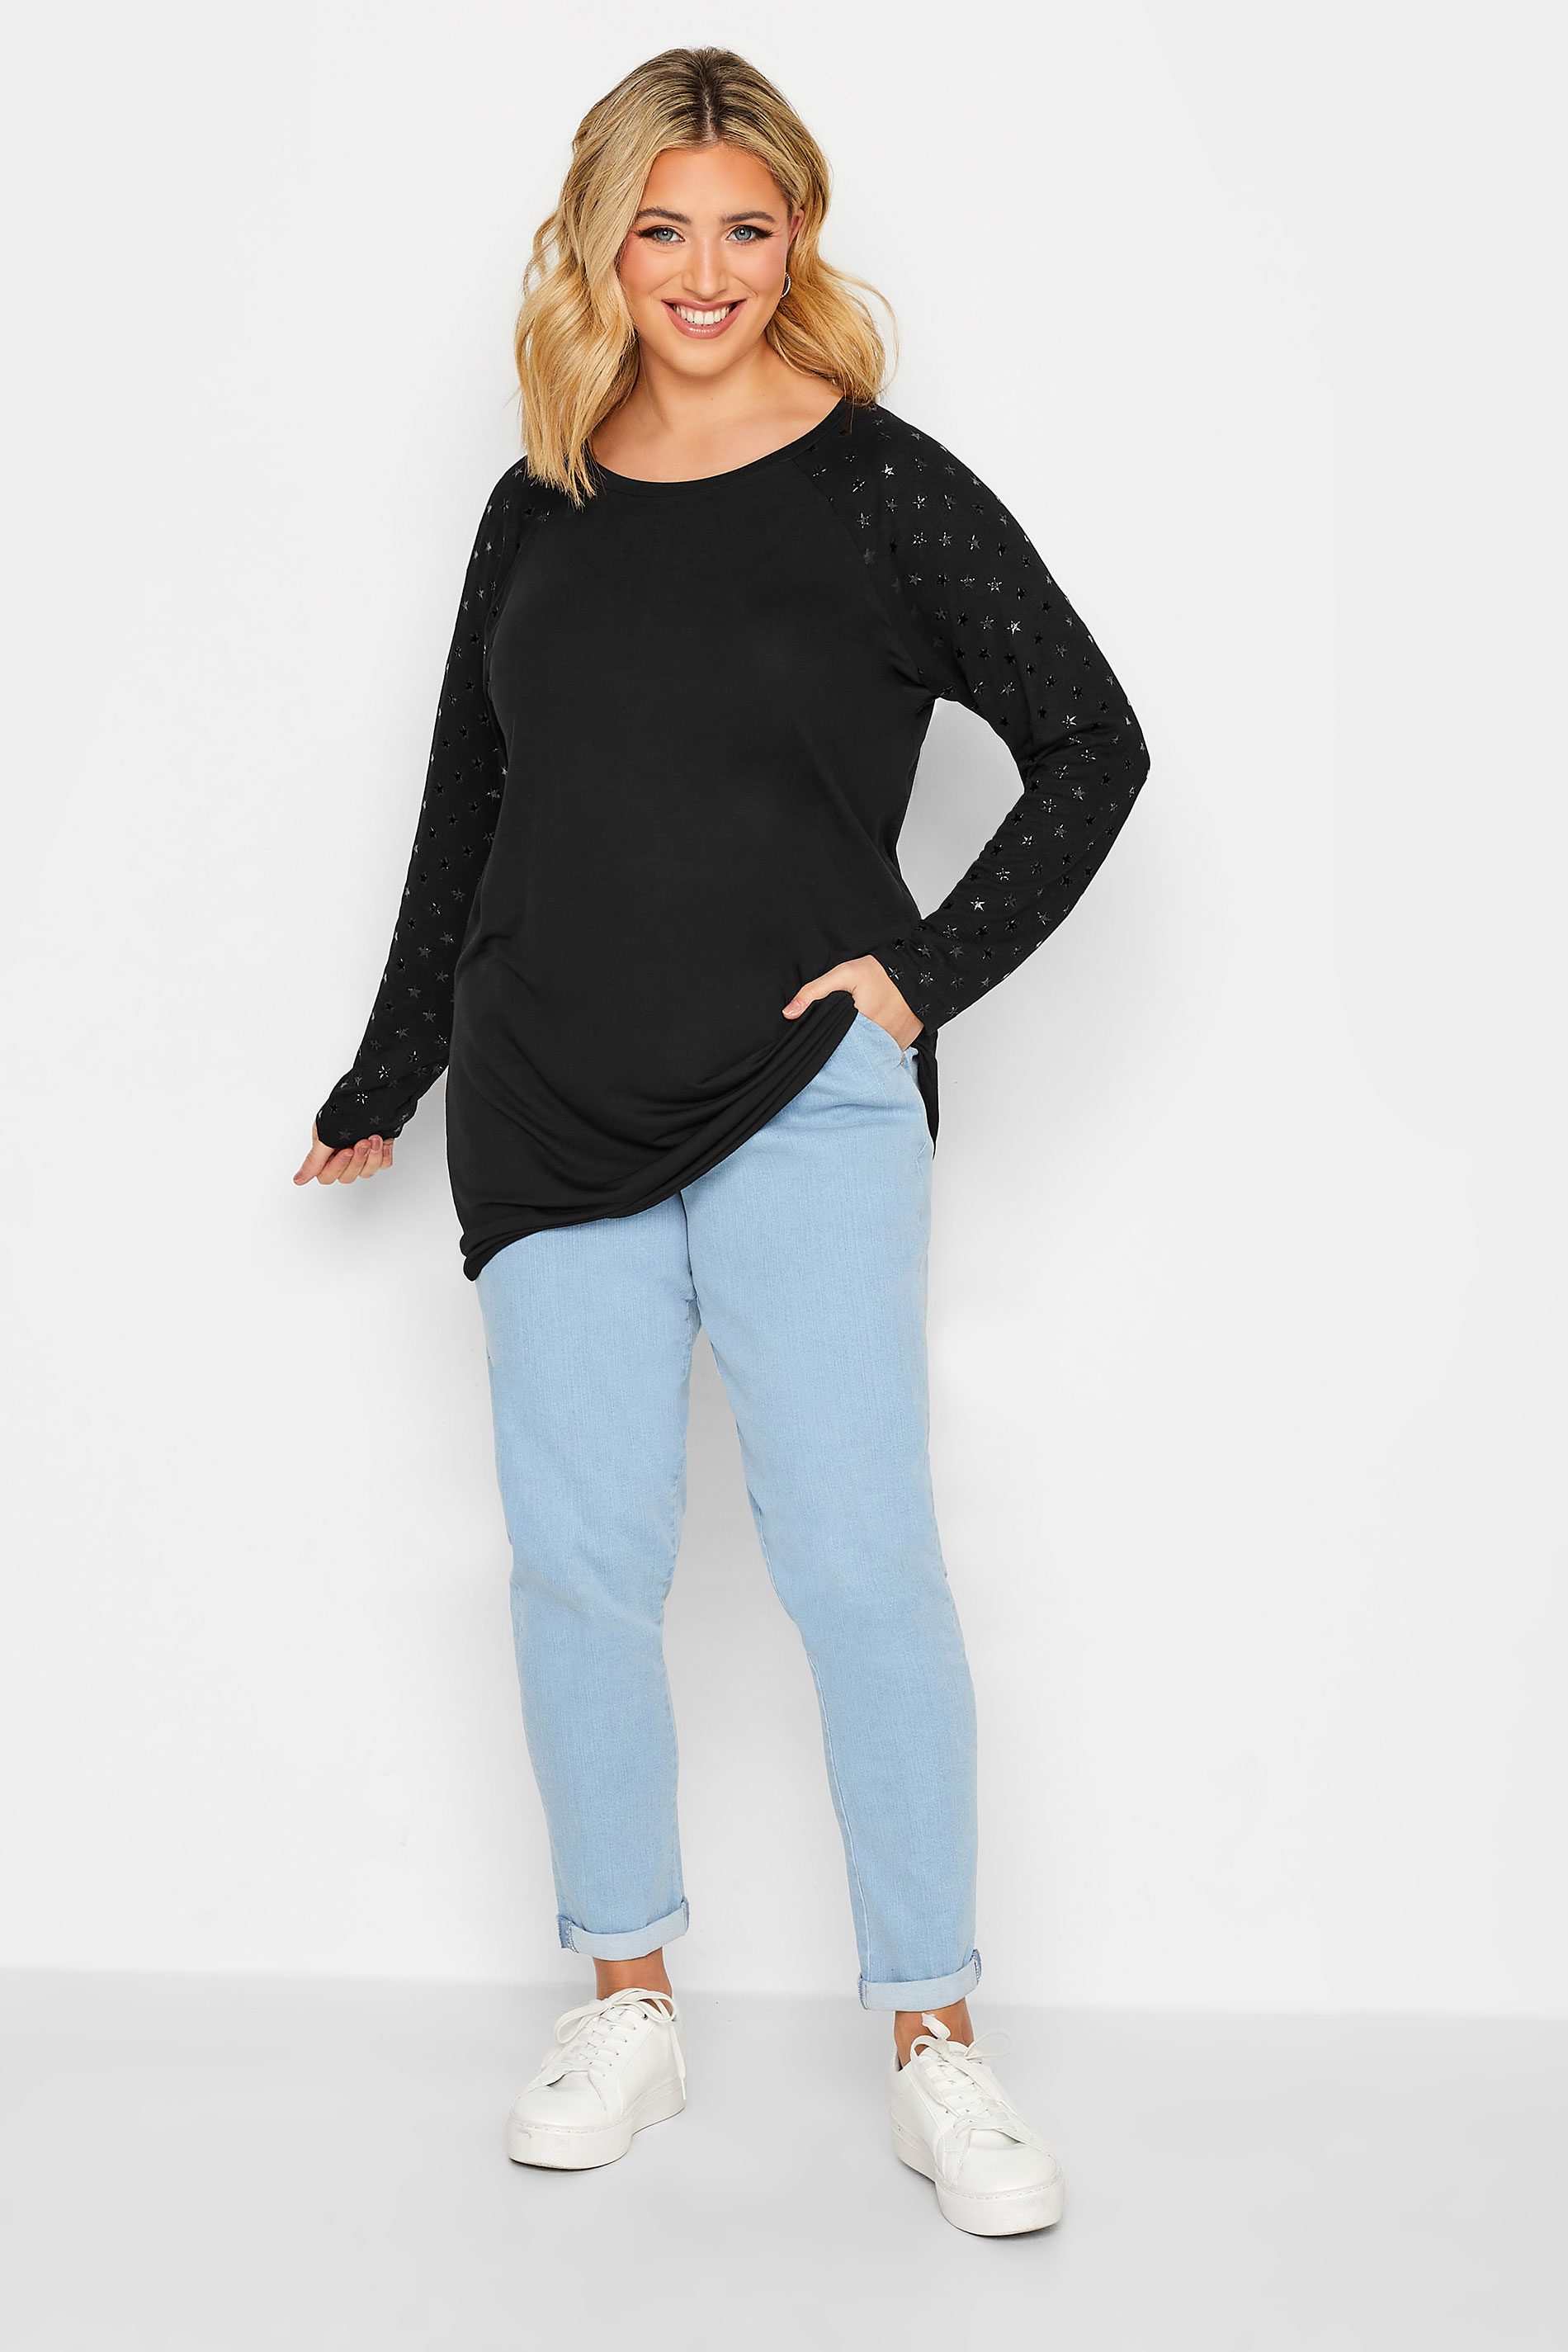 Plus Size Black Long Sleeve Star Print Top | Yours Clothing 2